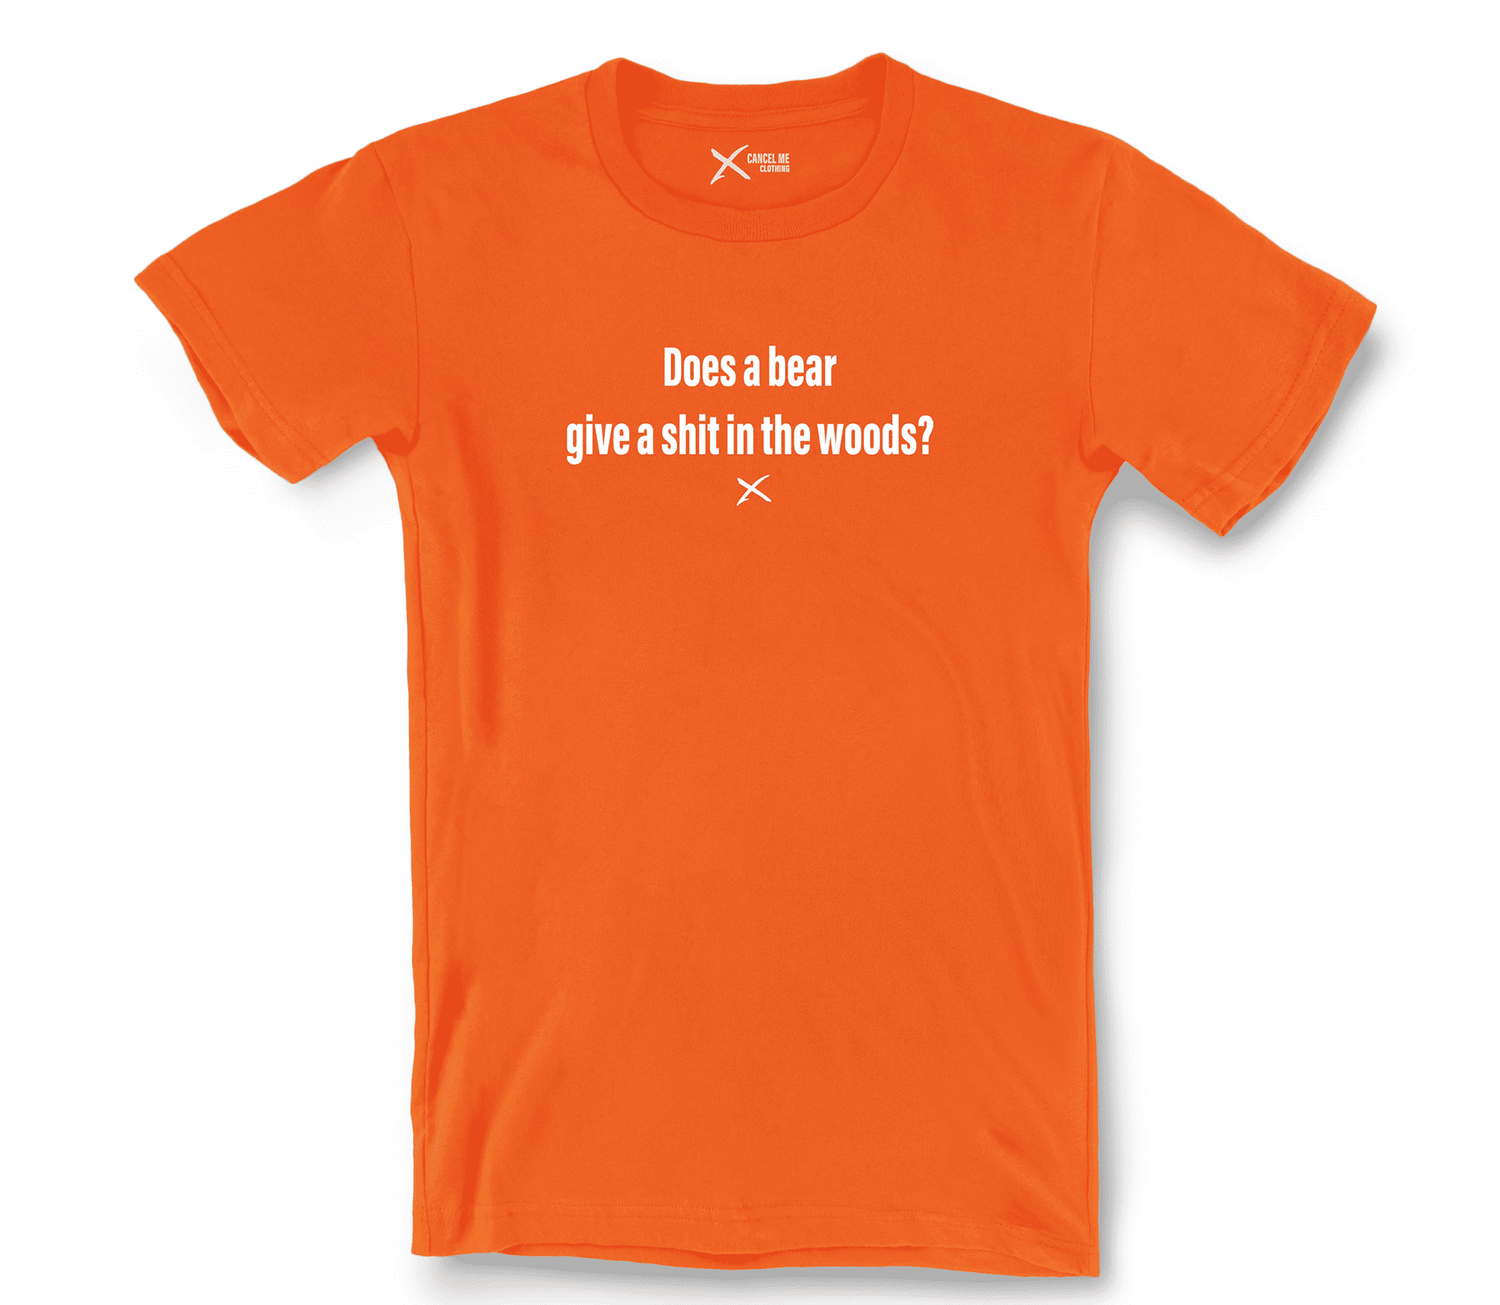 lp-shirt-birthday-1_7791853535402_does-a-bear-give-a-shit-in-the-woods-shirt_Orange.png